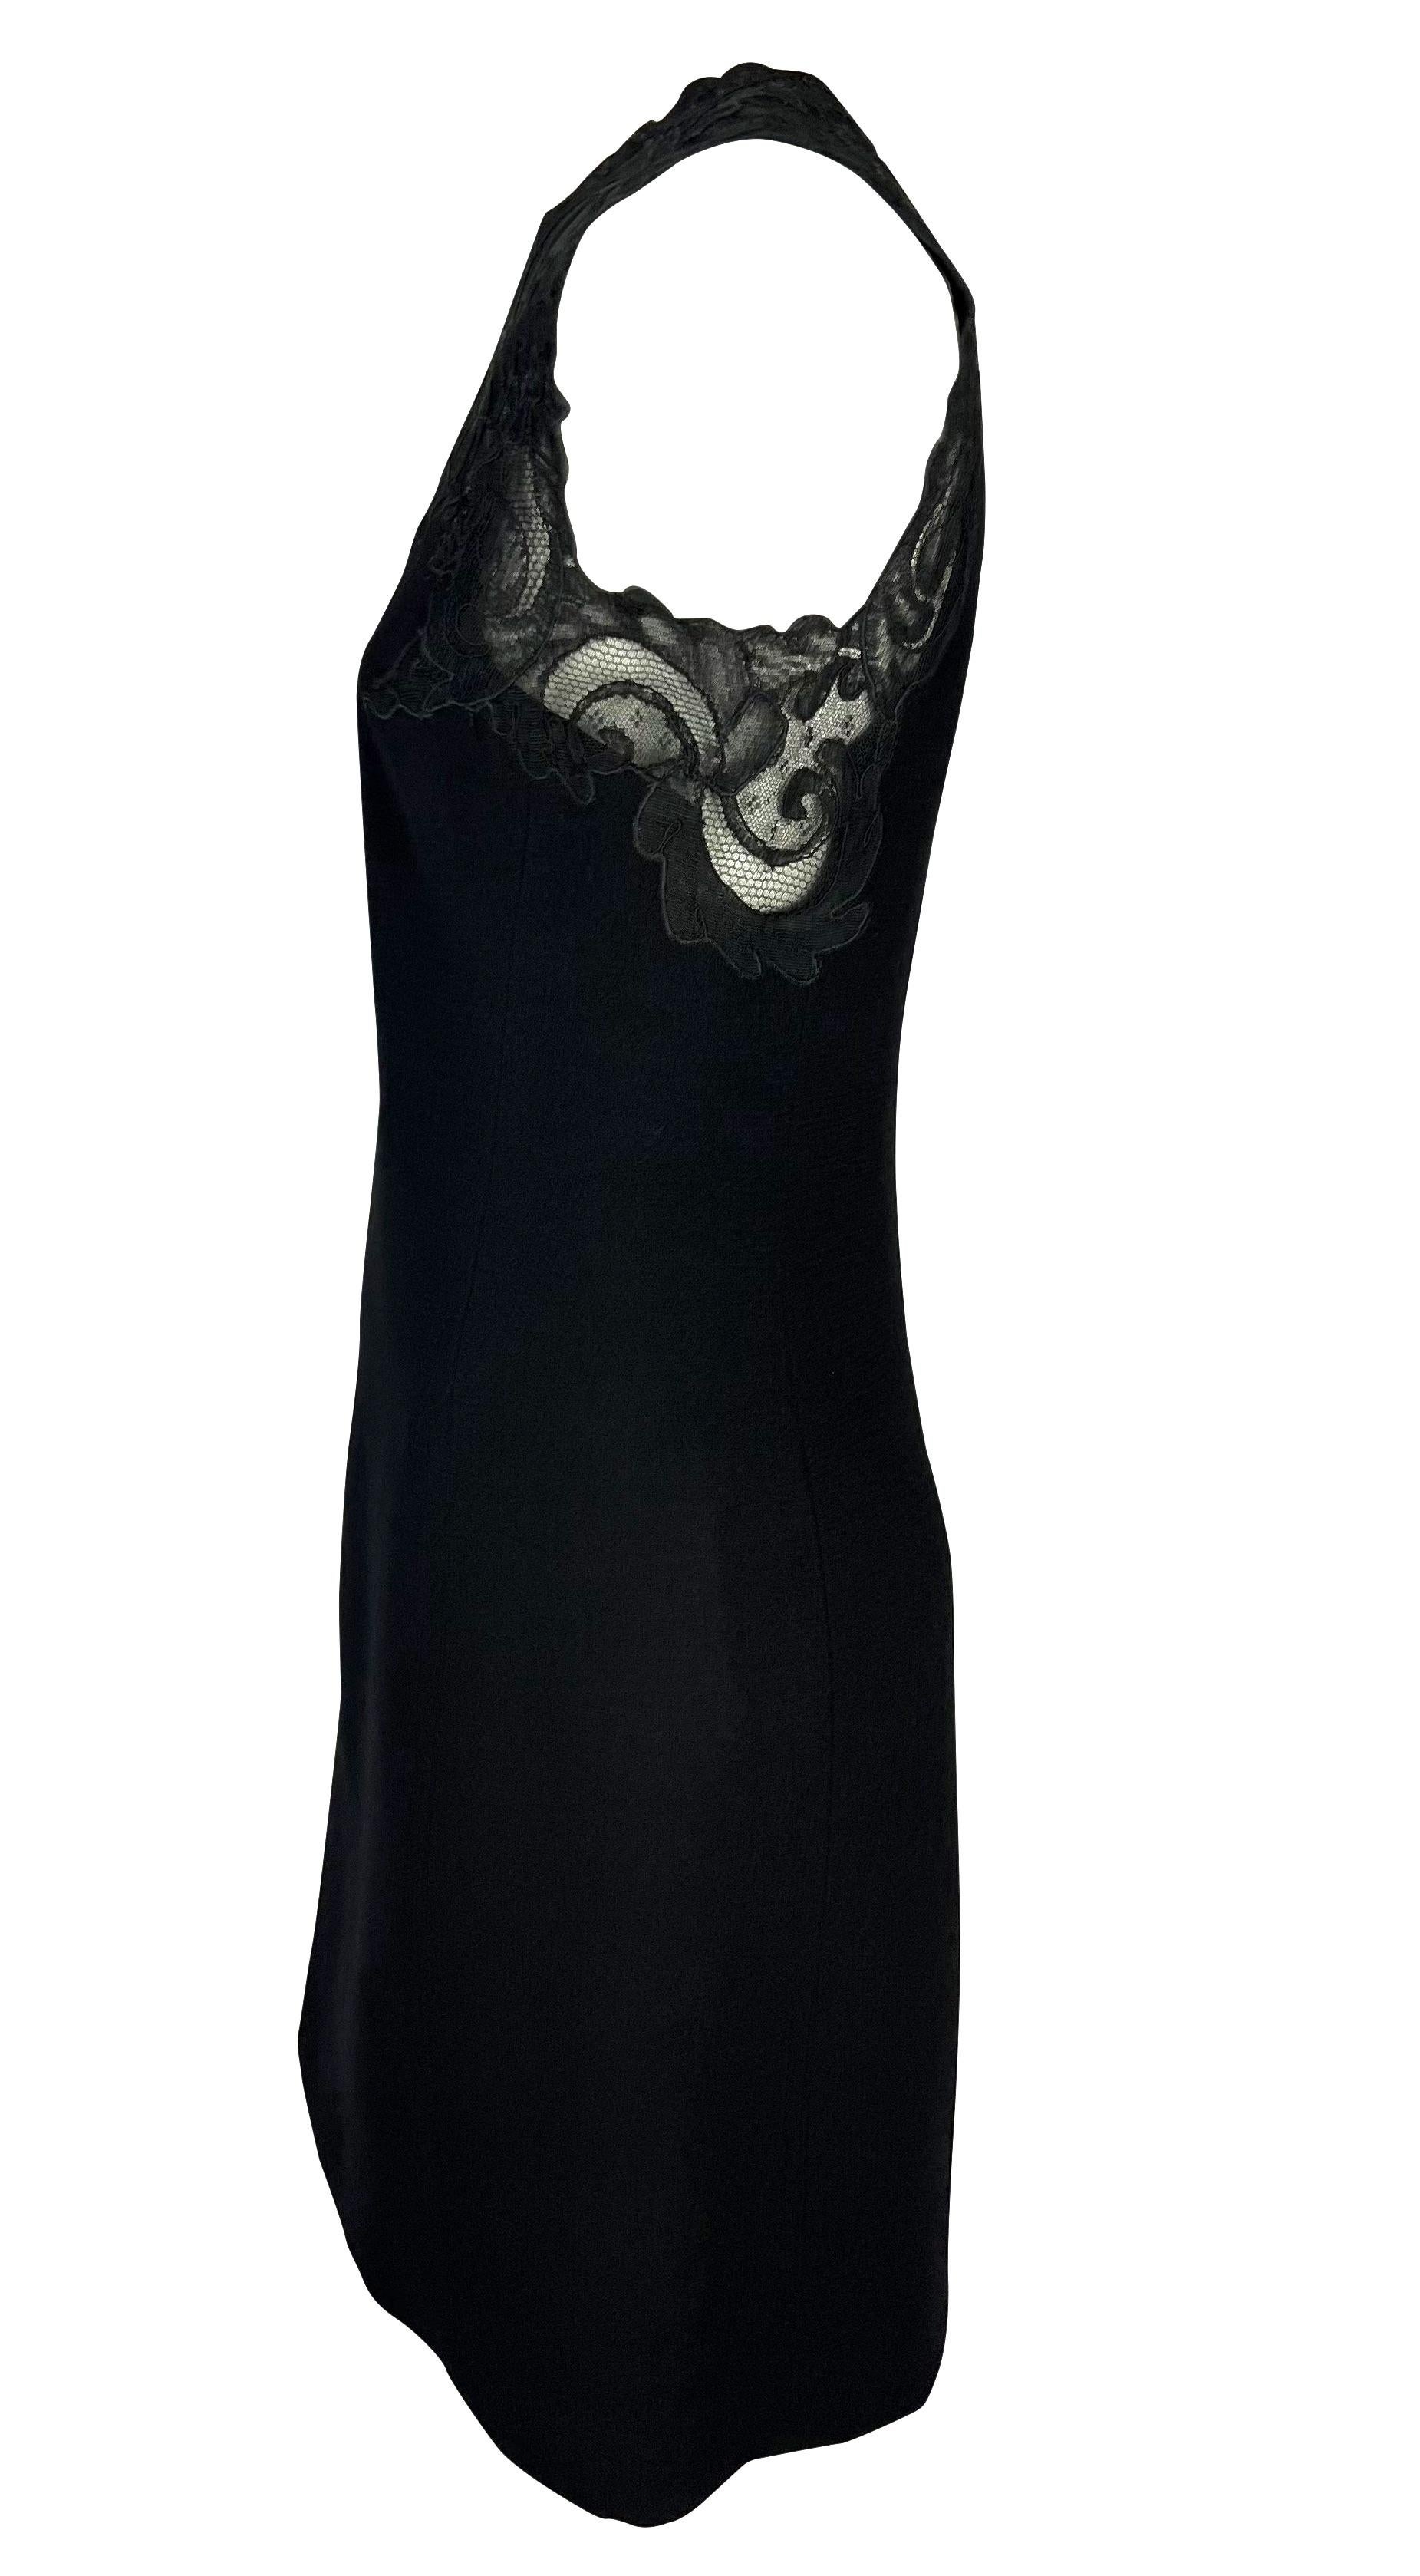 F/W 1996 Gianni Versace Couture Black Lace Bust Wool Stretch Dress In Excellent Condition For Sale In West Hollywood, CA